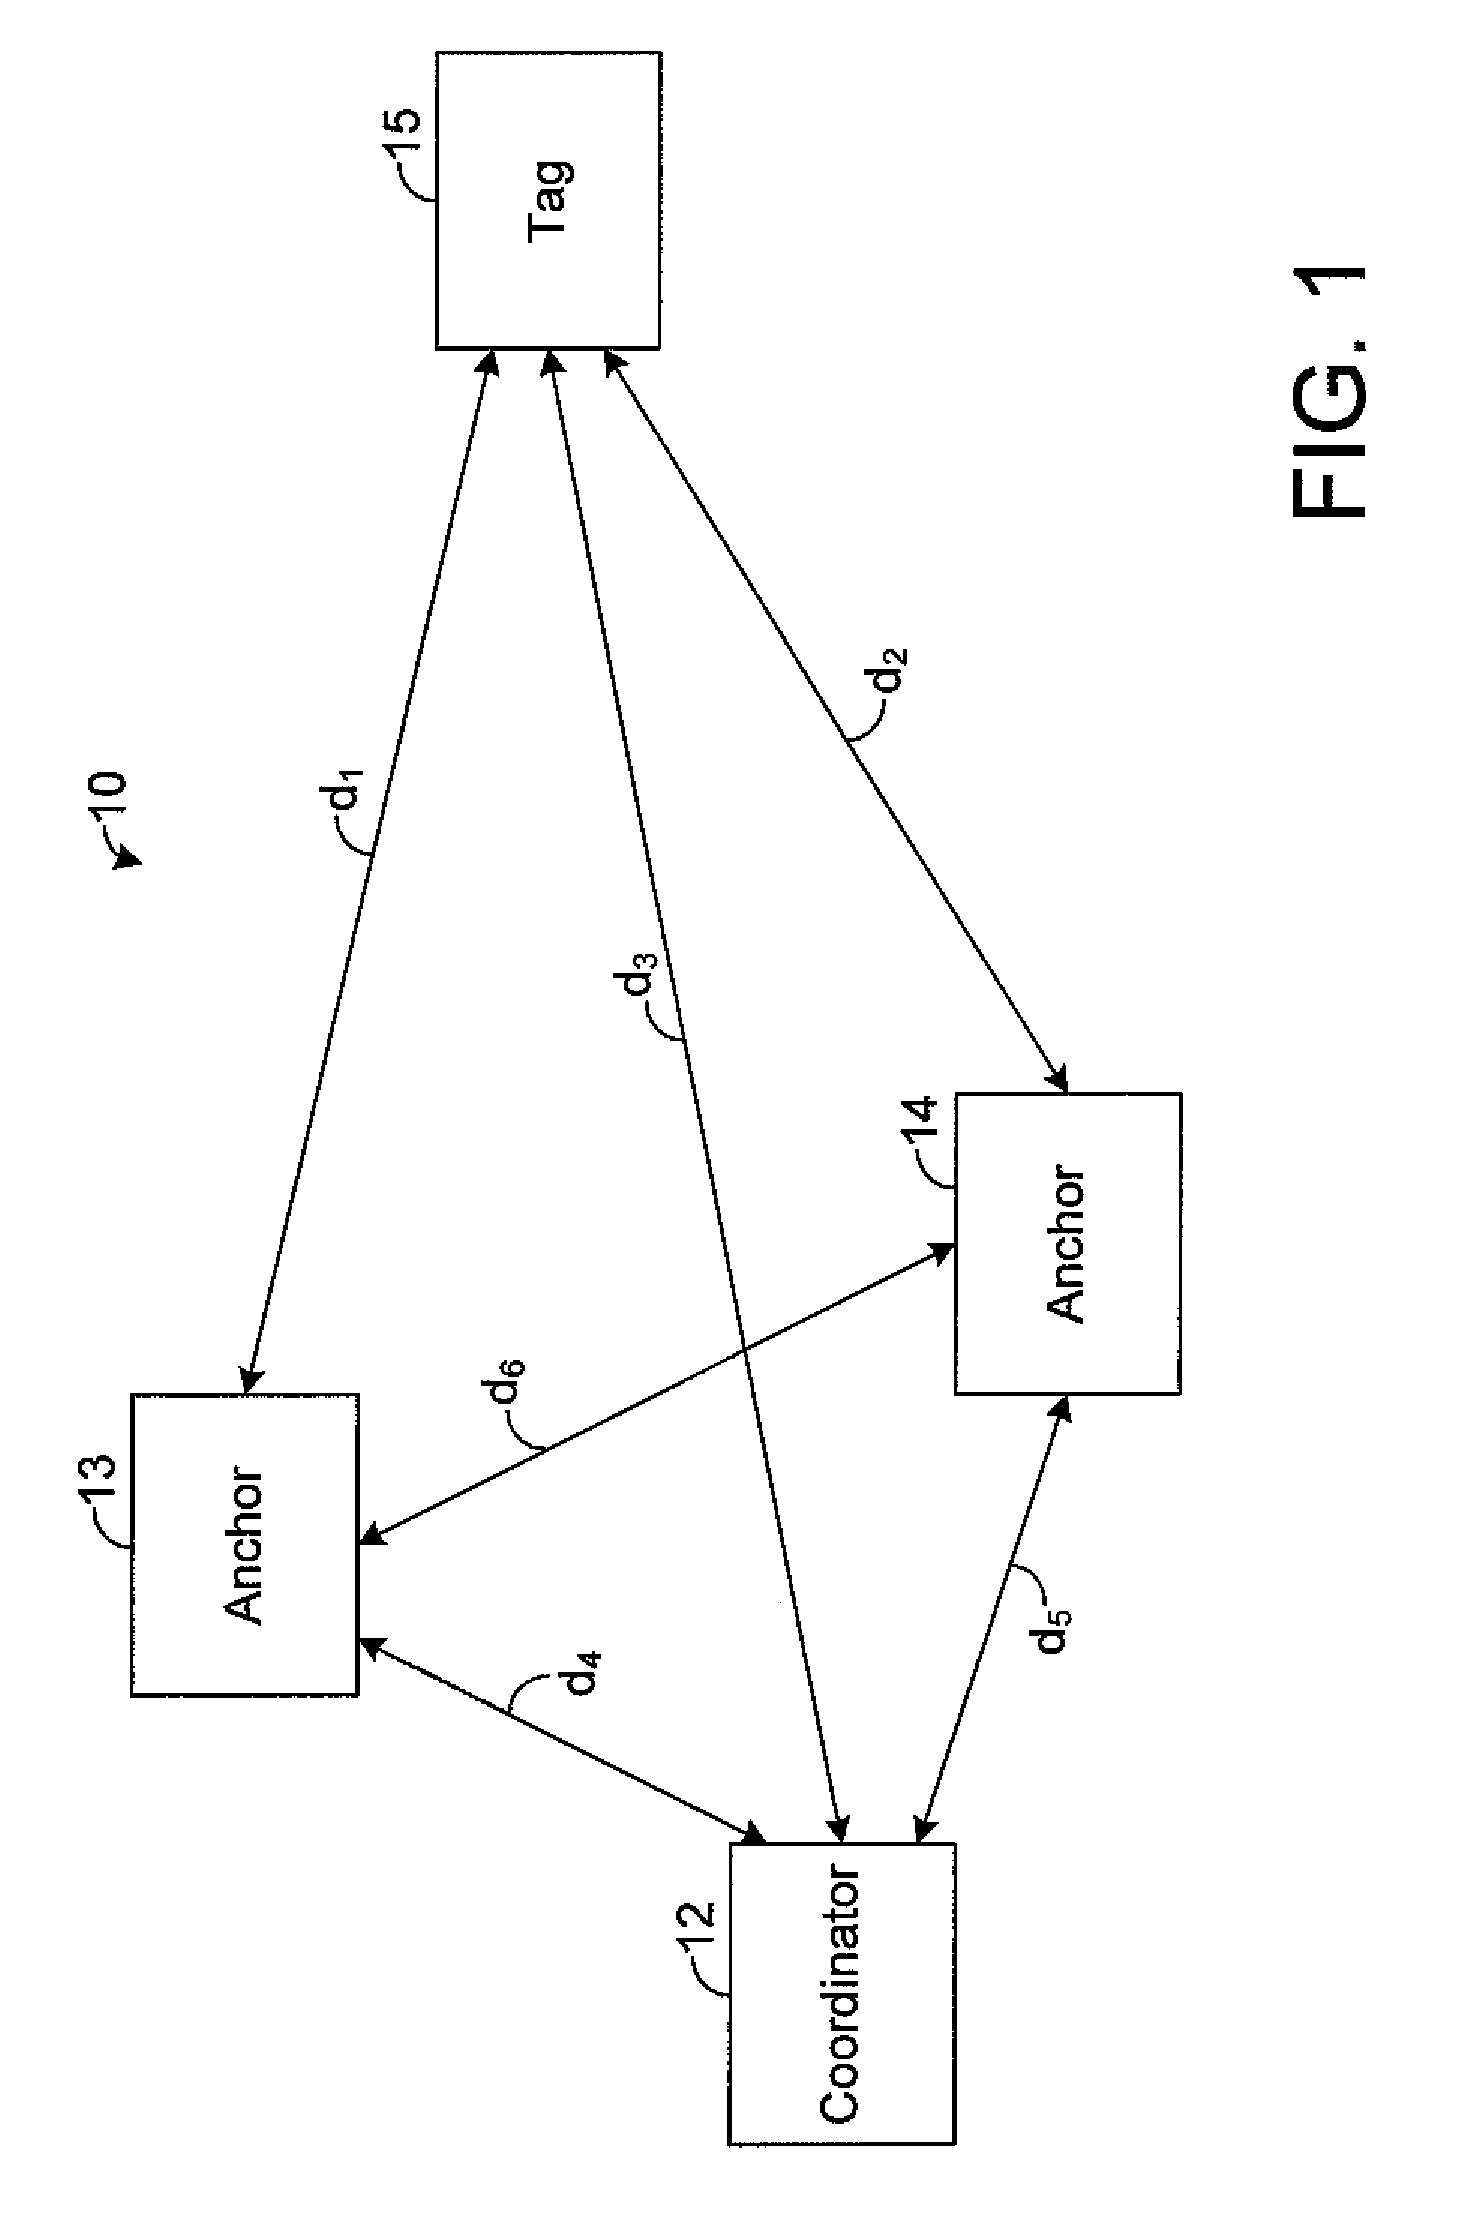 Local positioning systems and methods